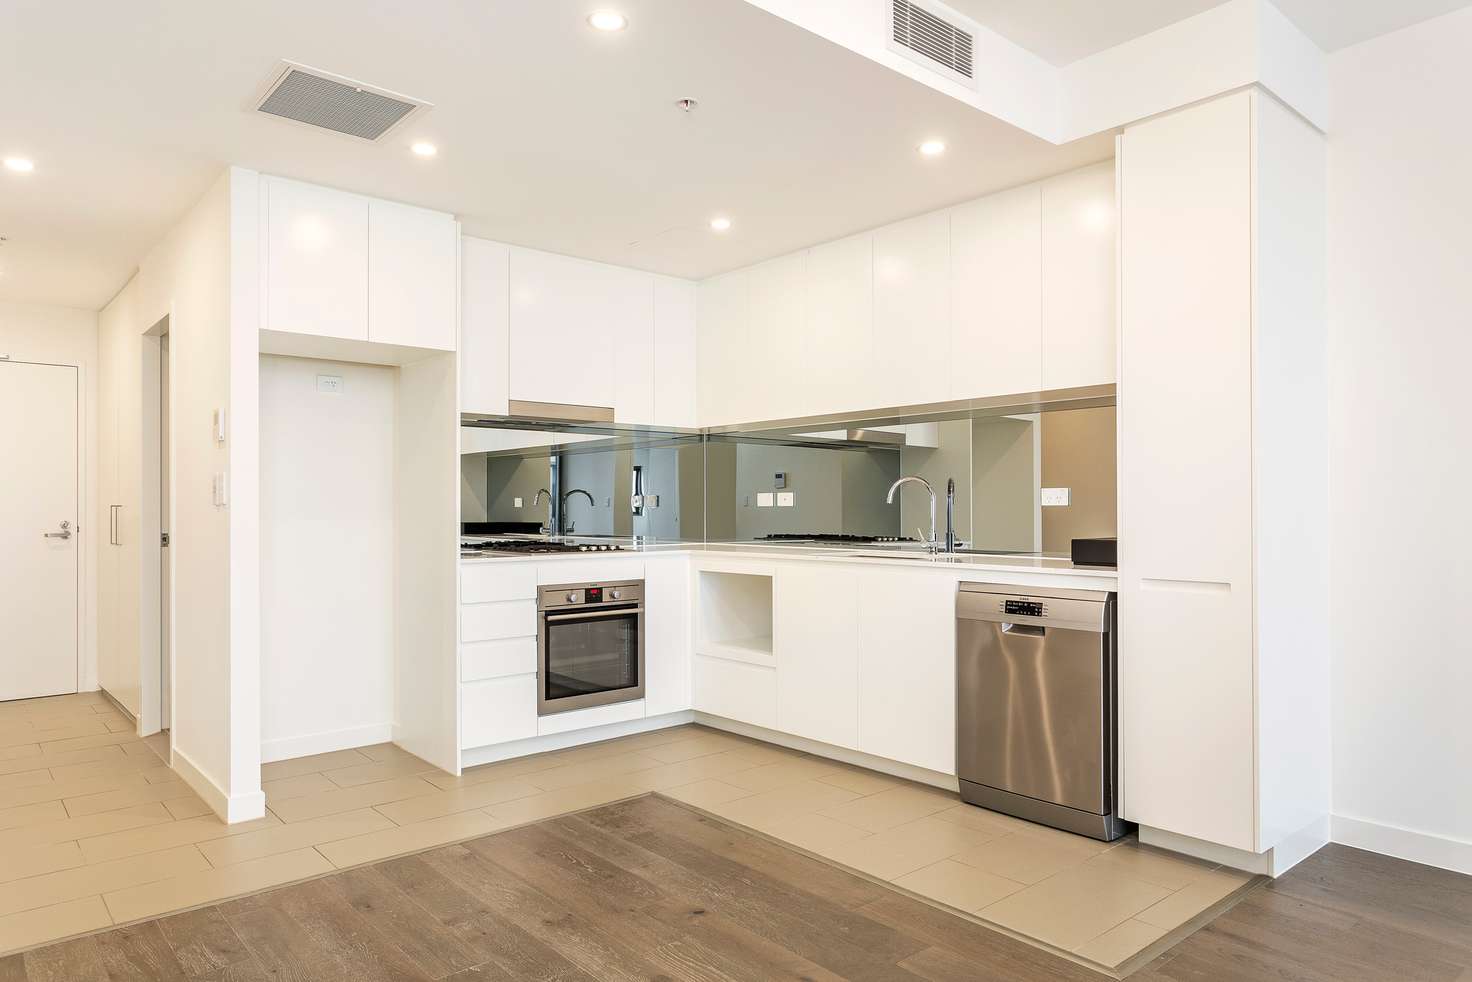 Main view of Homely apartment listing, 415/23-31 Treacy Street, Hurstville NSW 2220